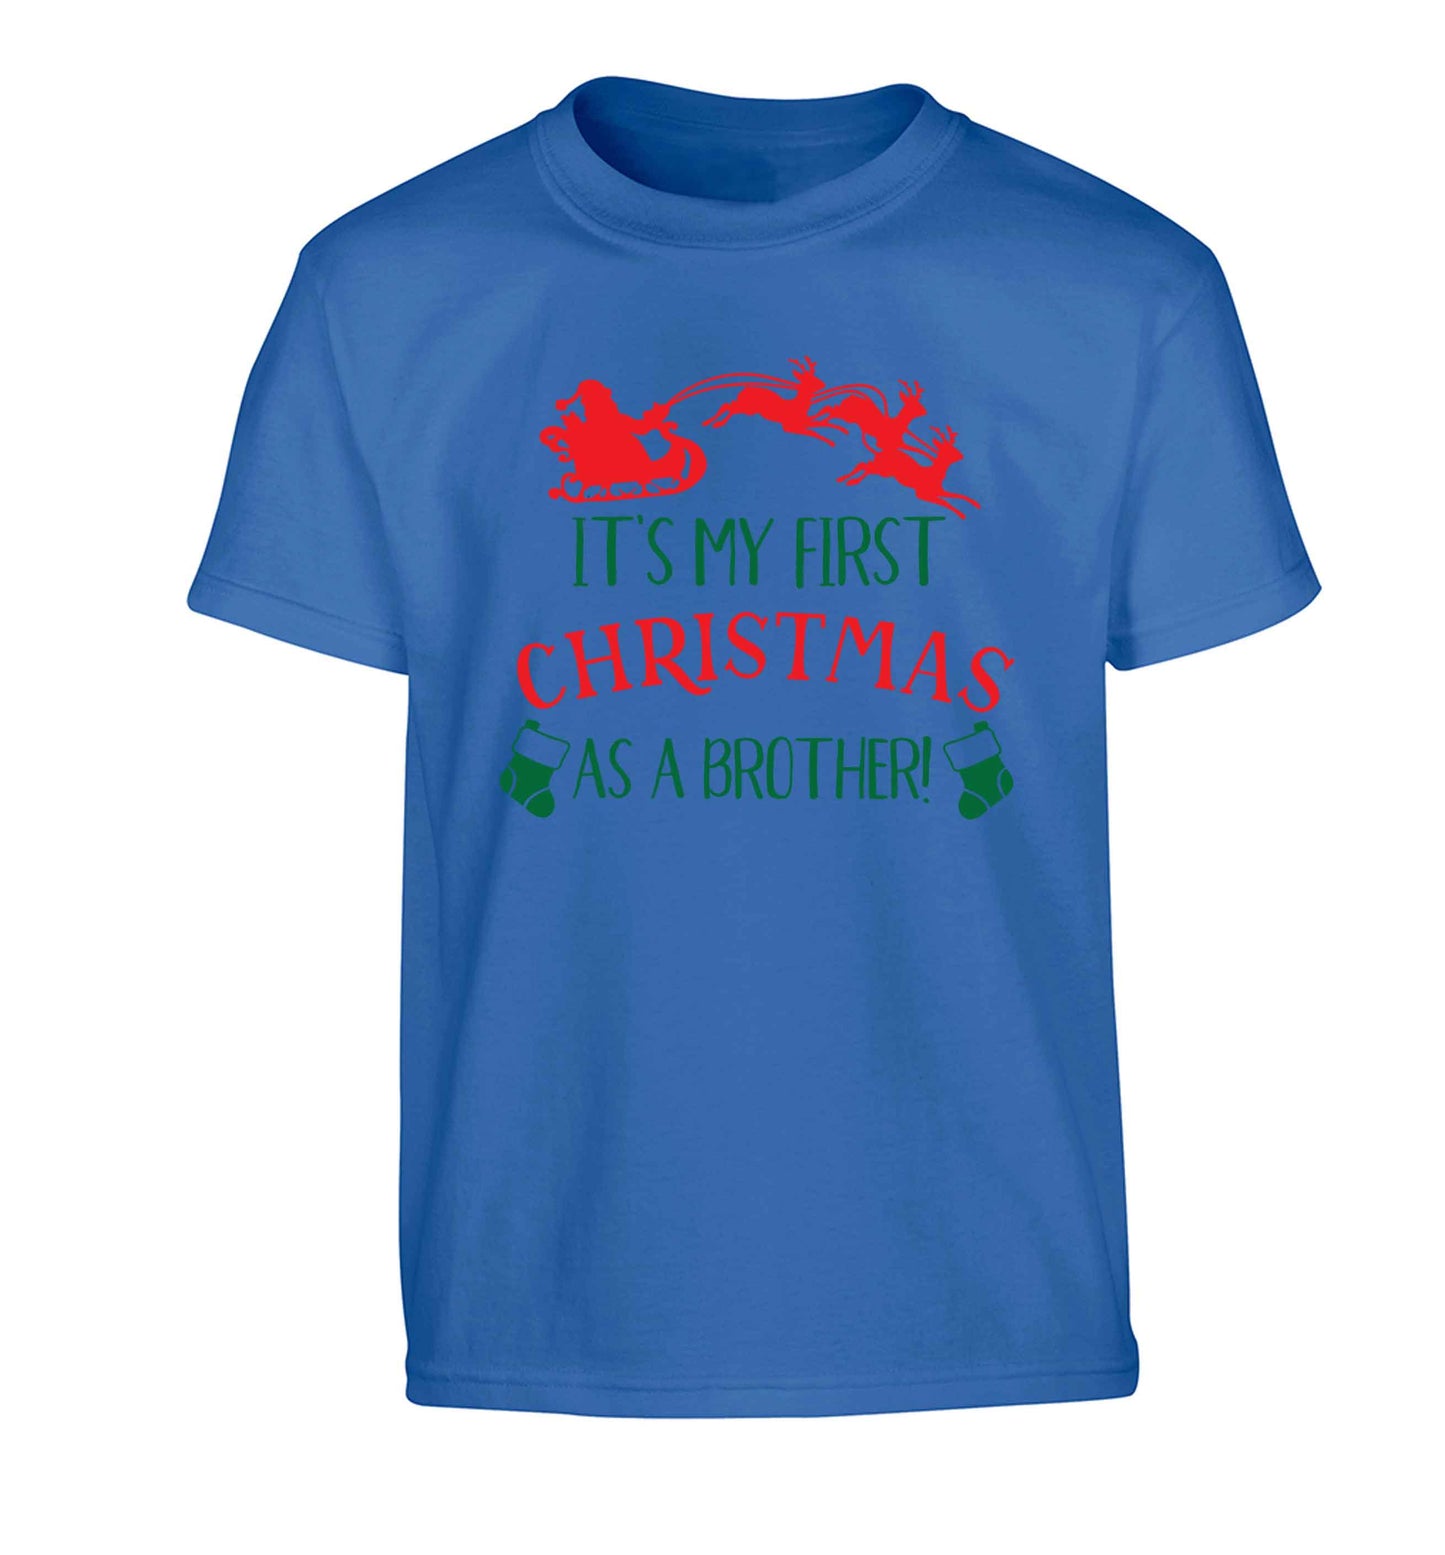 It's my first Christmas as a brother! Children's blue Tshirt 12-13 Years